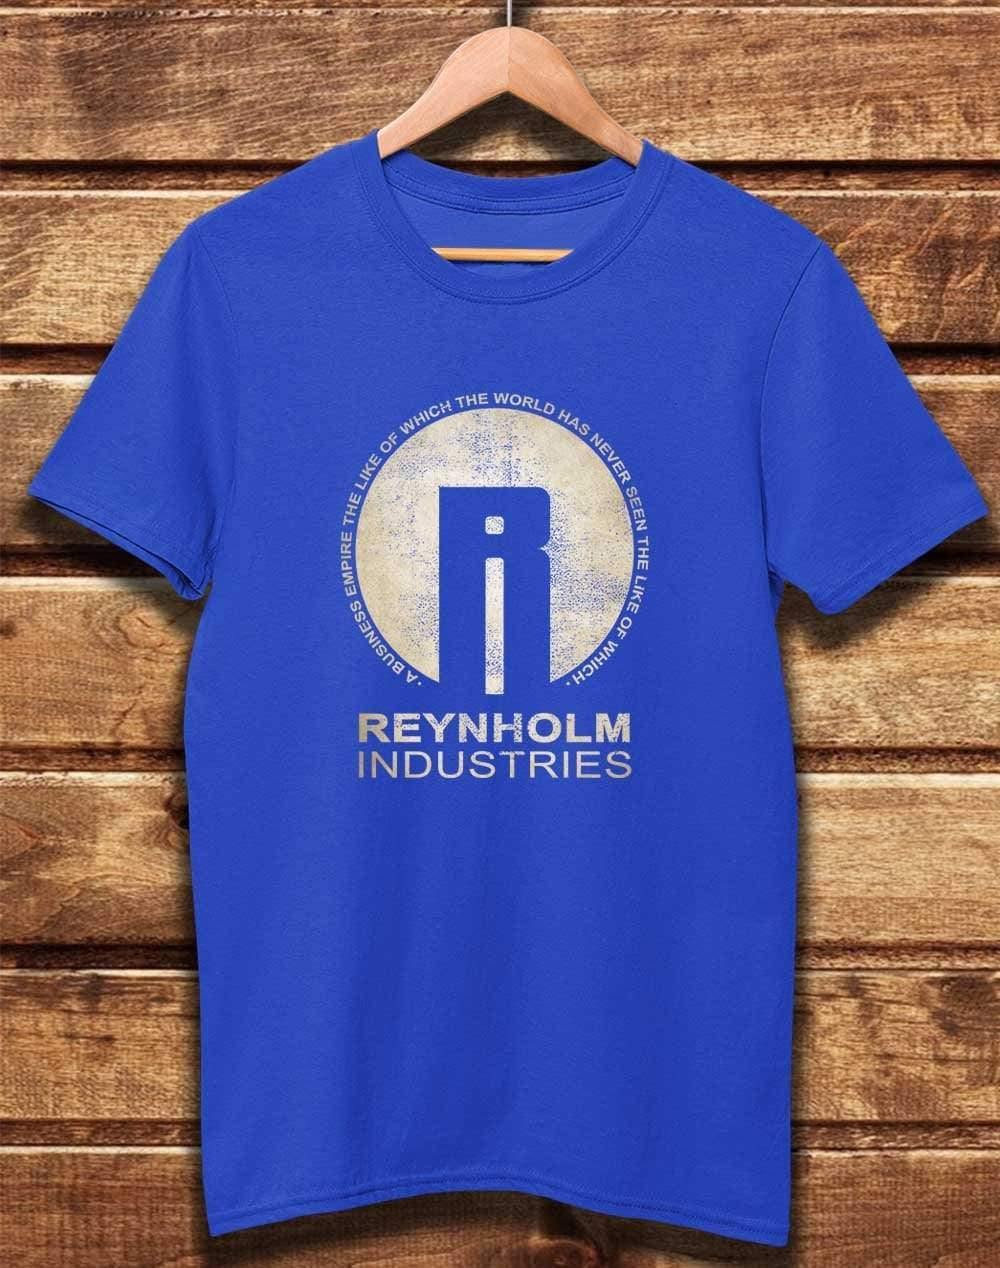 DELUXE Reynholm Industries Organic Cotton T-Shirt XS / Bright Blue  - Off World Tees